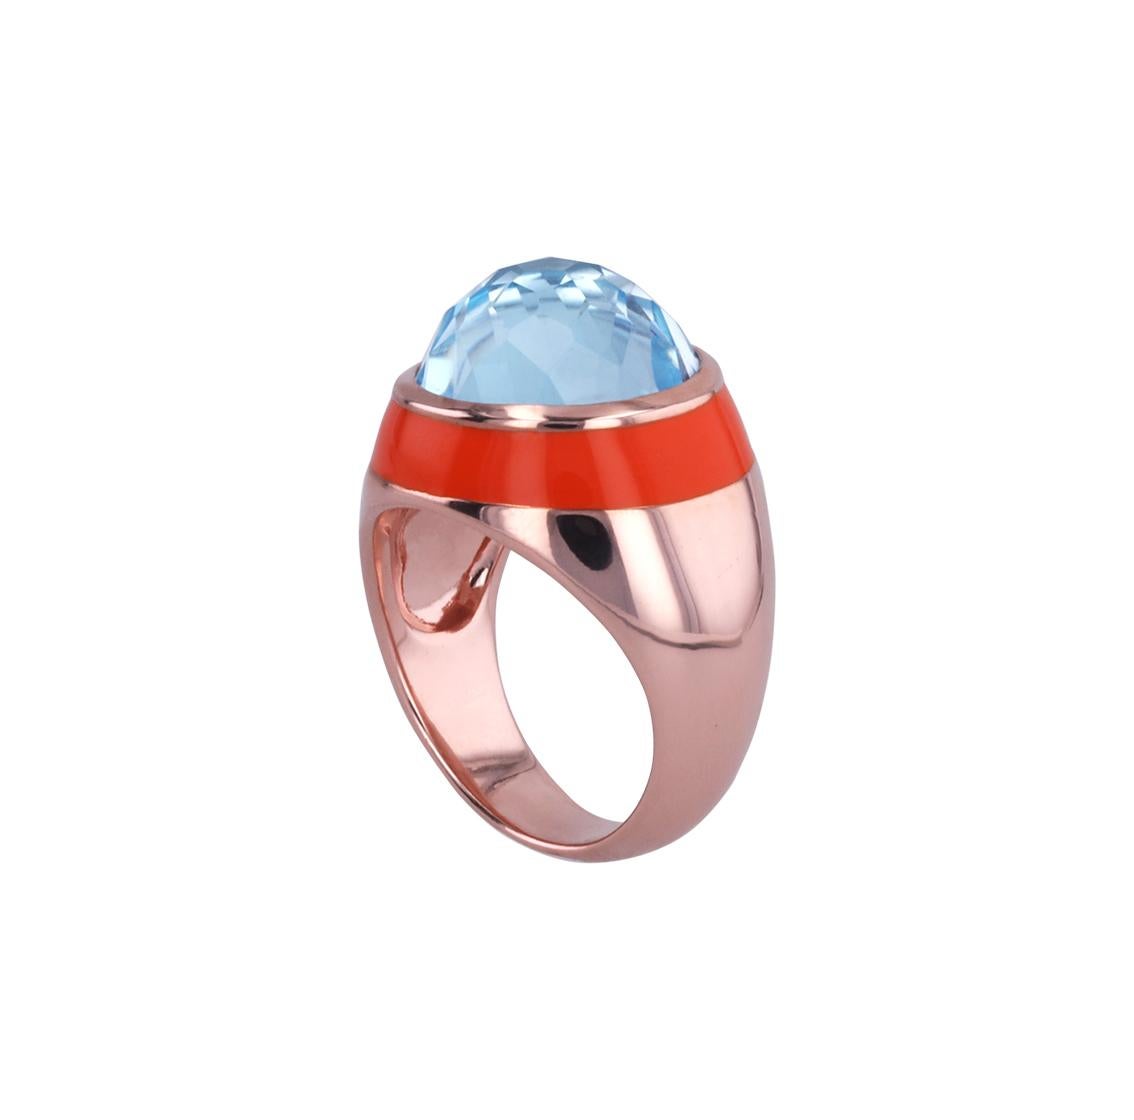 Fathom Enamel Ring with Sky Blue Topaz in Rose Gold For Sale 5